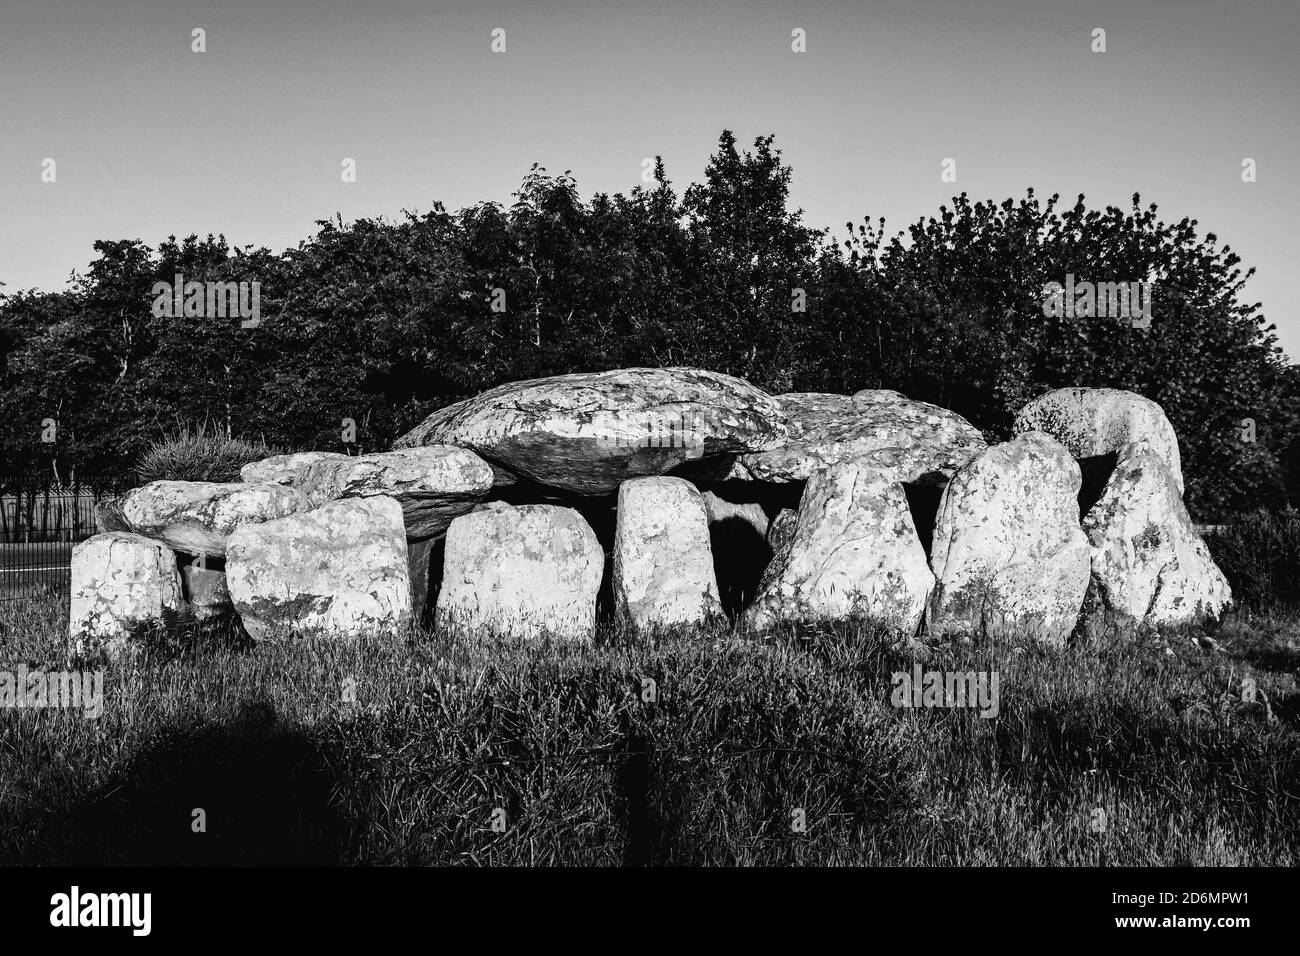 Dolmen passage grave near the Kermario alignment at Carnac, France. Black and white photograph Stock Photo